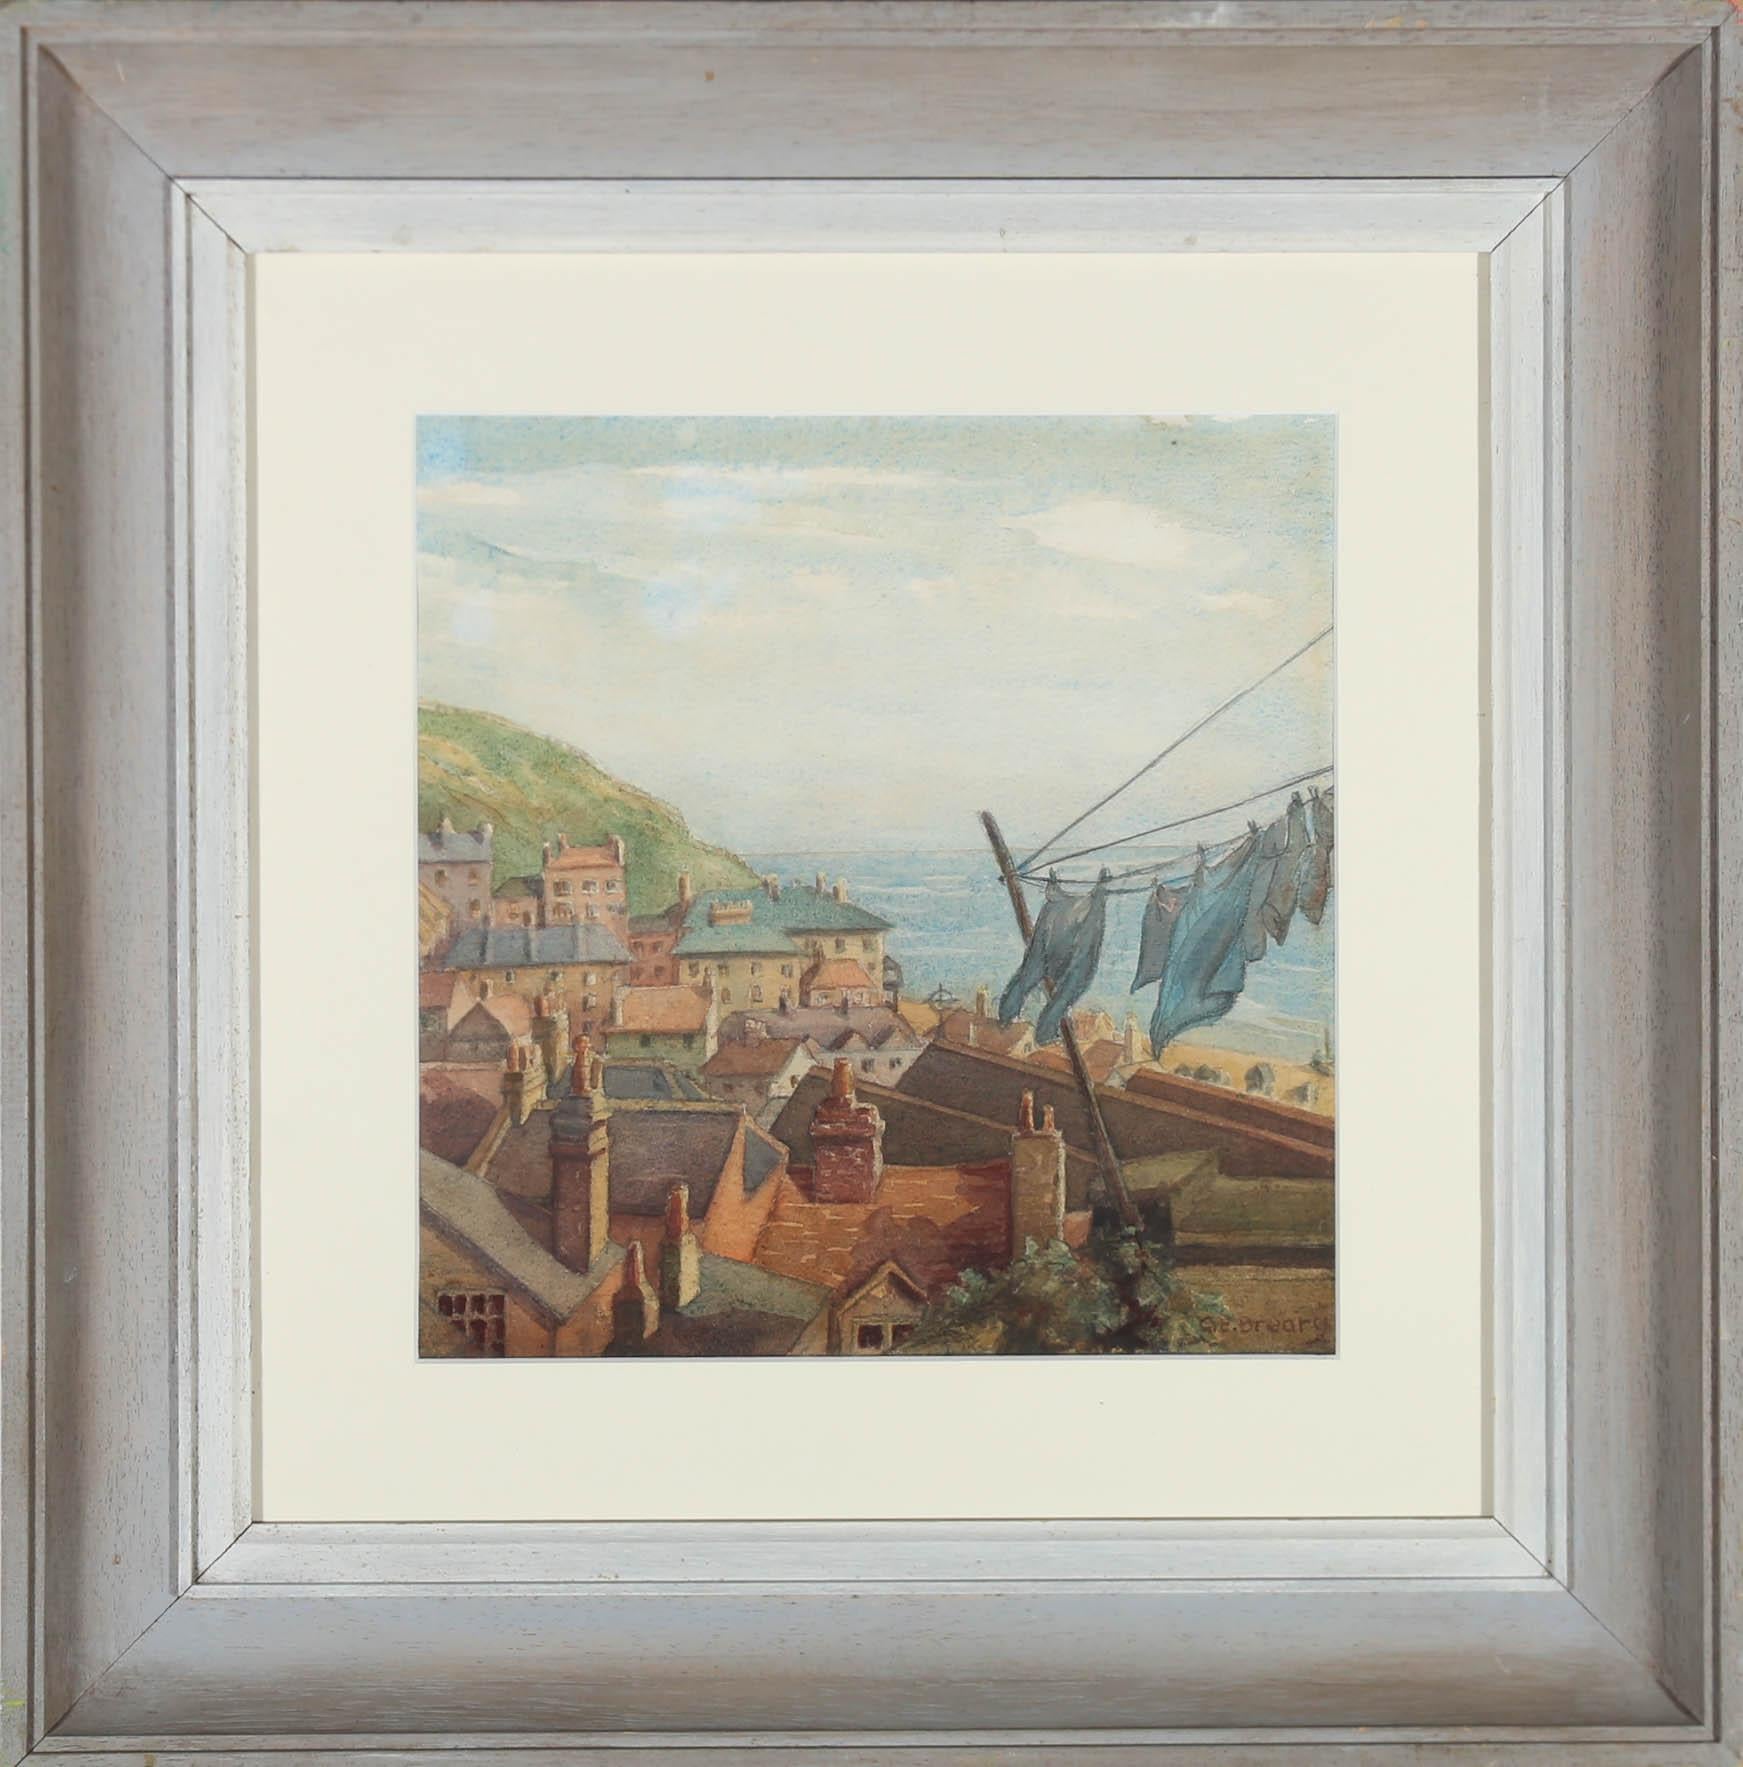 A wonderful mid-century watercolour depicting the rooftops of a coastal village. Washing is hanging out to dry in the breezy sea air and light clouds gather along the horizon. Well presented in a contemporary wood frame with a white mount. Signed.